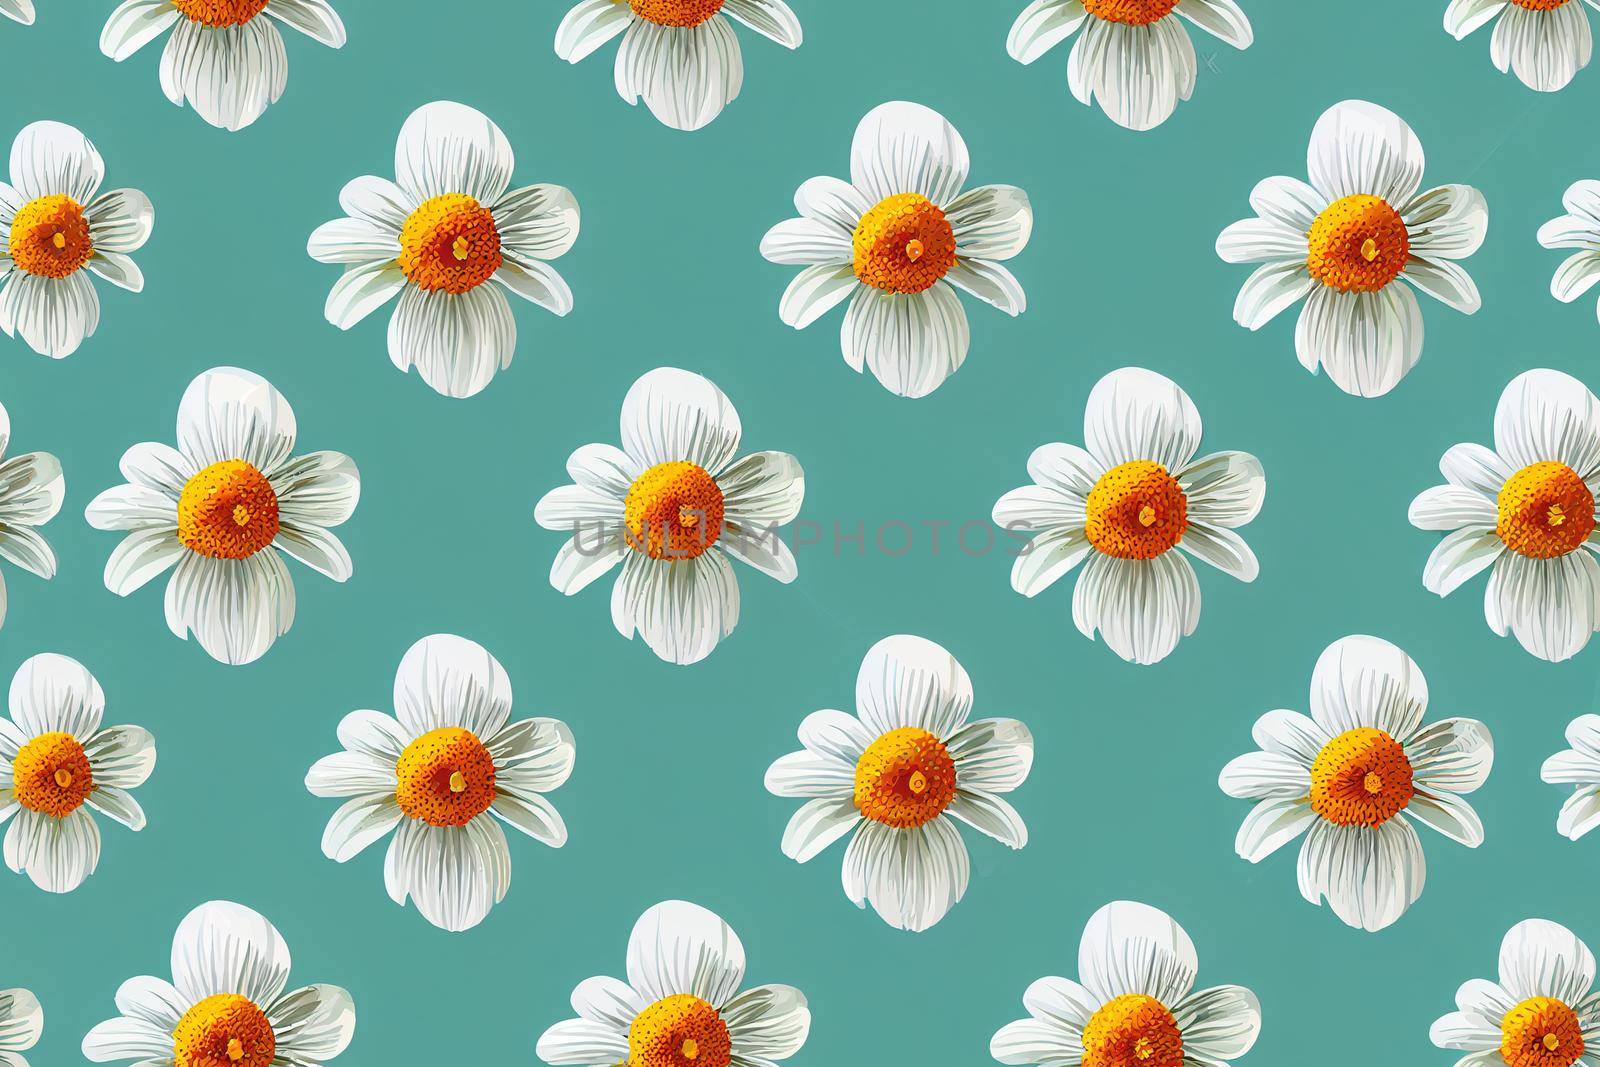 Seamless pattern with daisies. Mixed small and large blooming flower heads ornament. Bright summer botanical background in modern flat design.